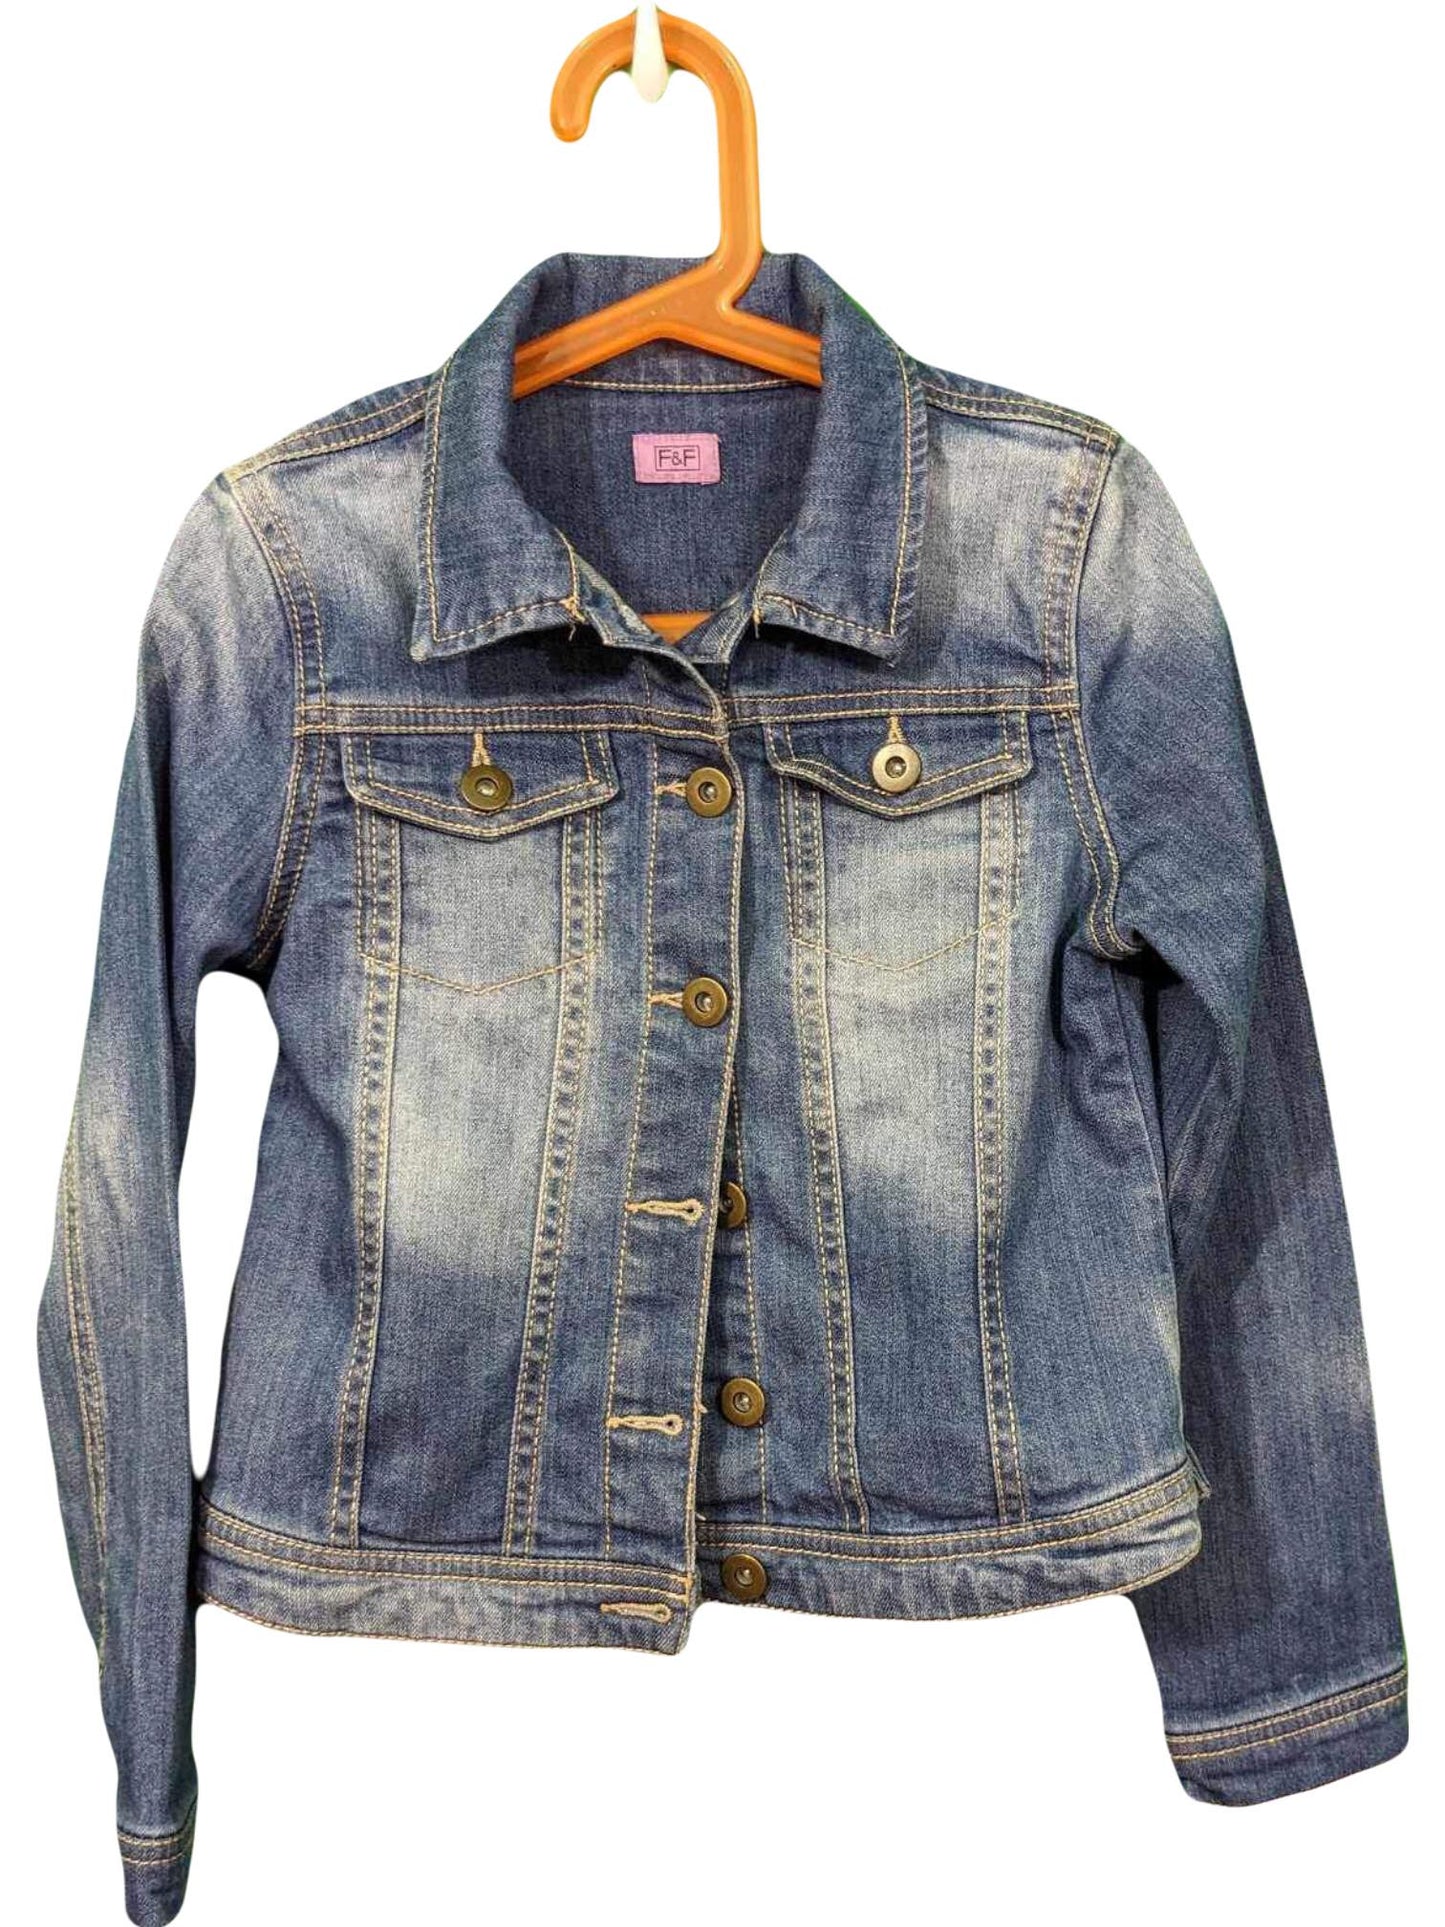 Age 8-9 Winnie the Pooh Inspired Denim Jacket - Bookish - A. A. Milne - Silly Old Bear